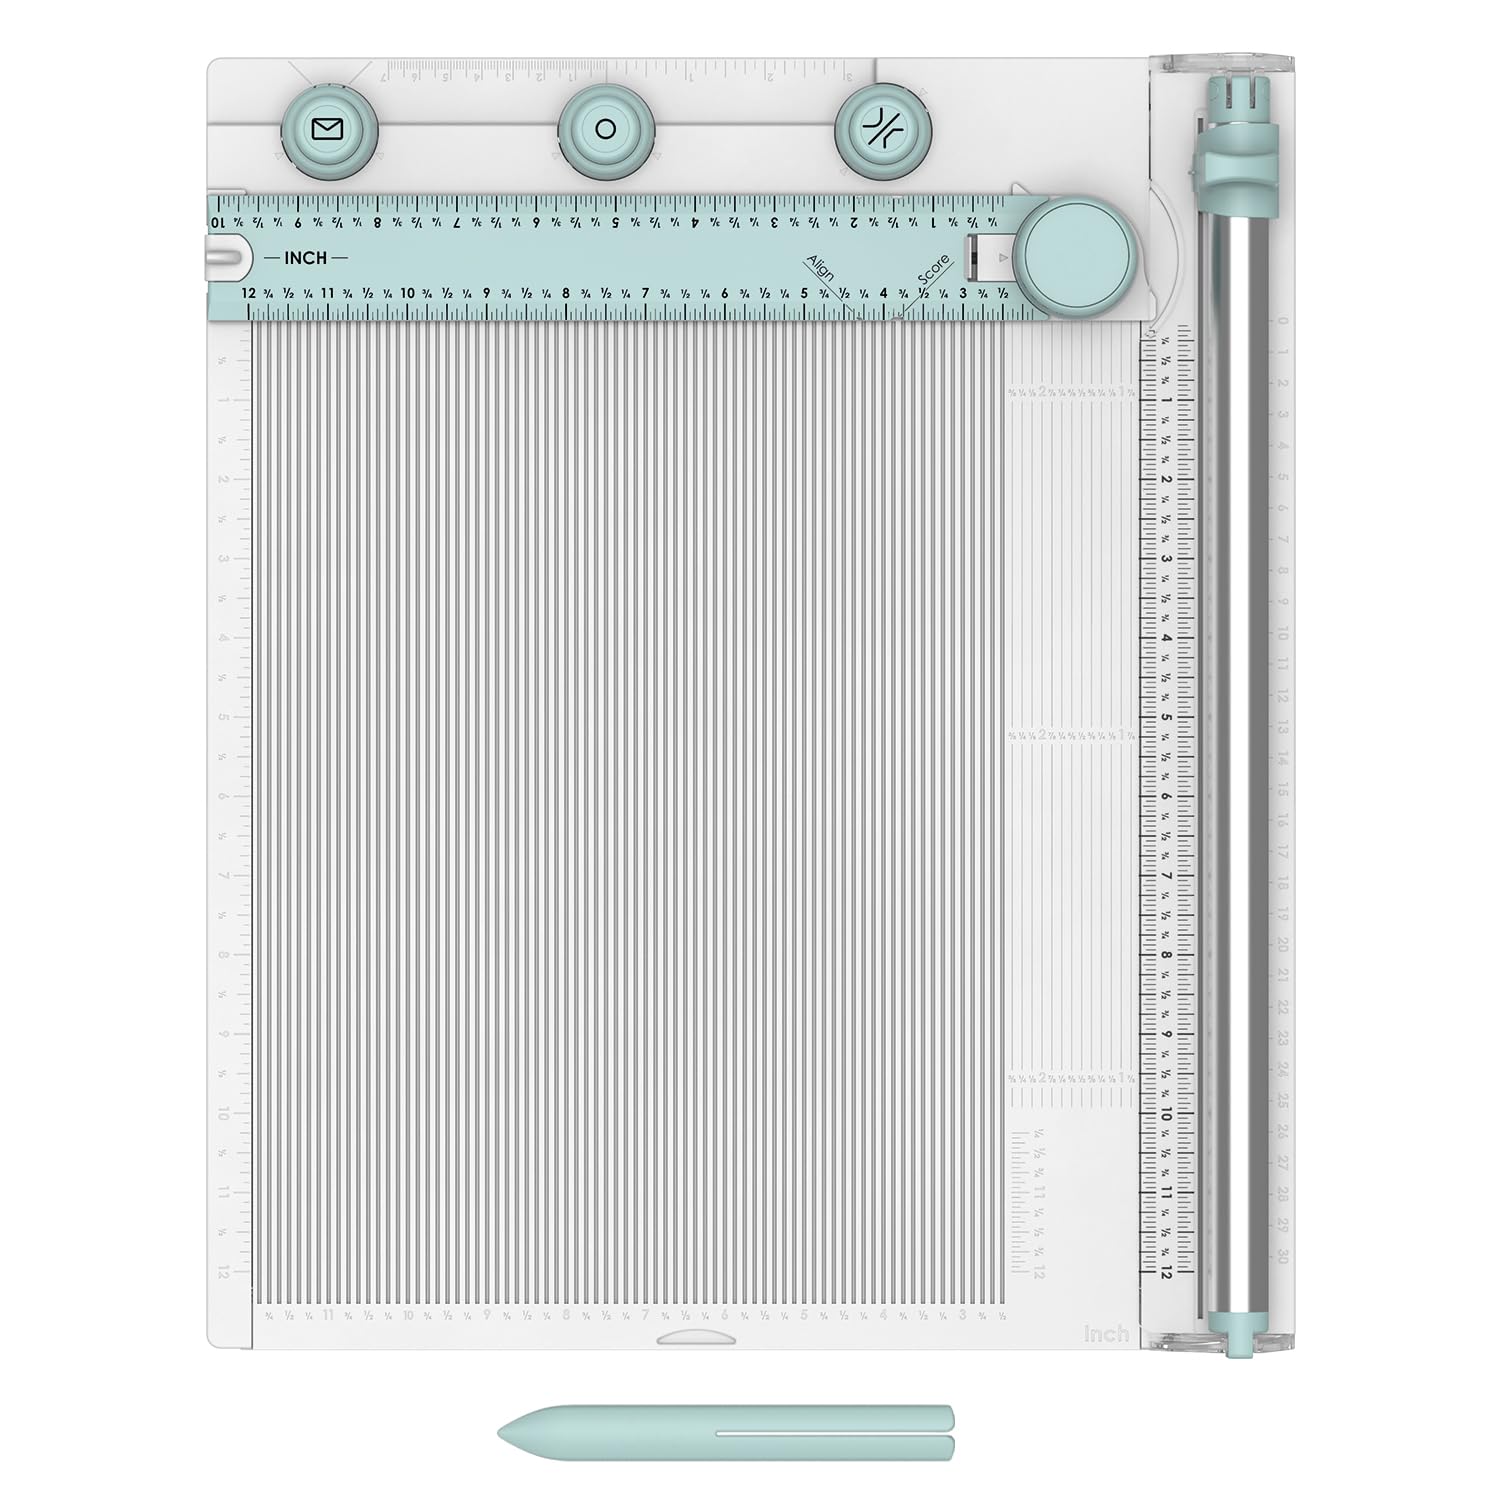 Sizzix Scoring Board & Trimmer (30cm x 30cm) | Tool for Creating Envelopes, 3-D Boxes, Trimming & Measuring | 665797, One Size, Mint/White